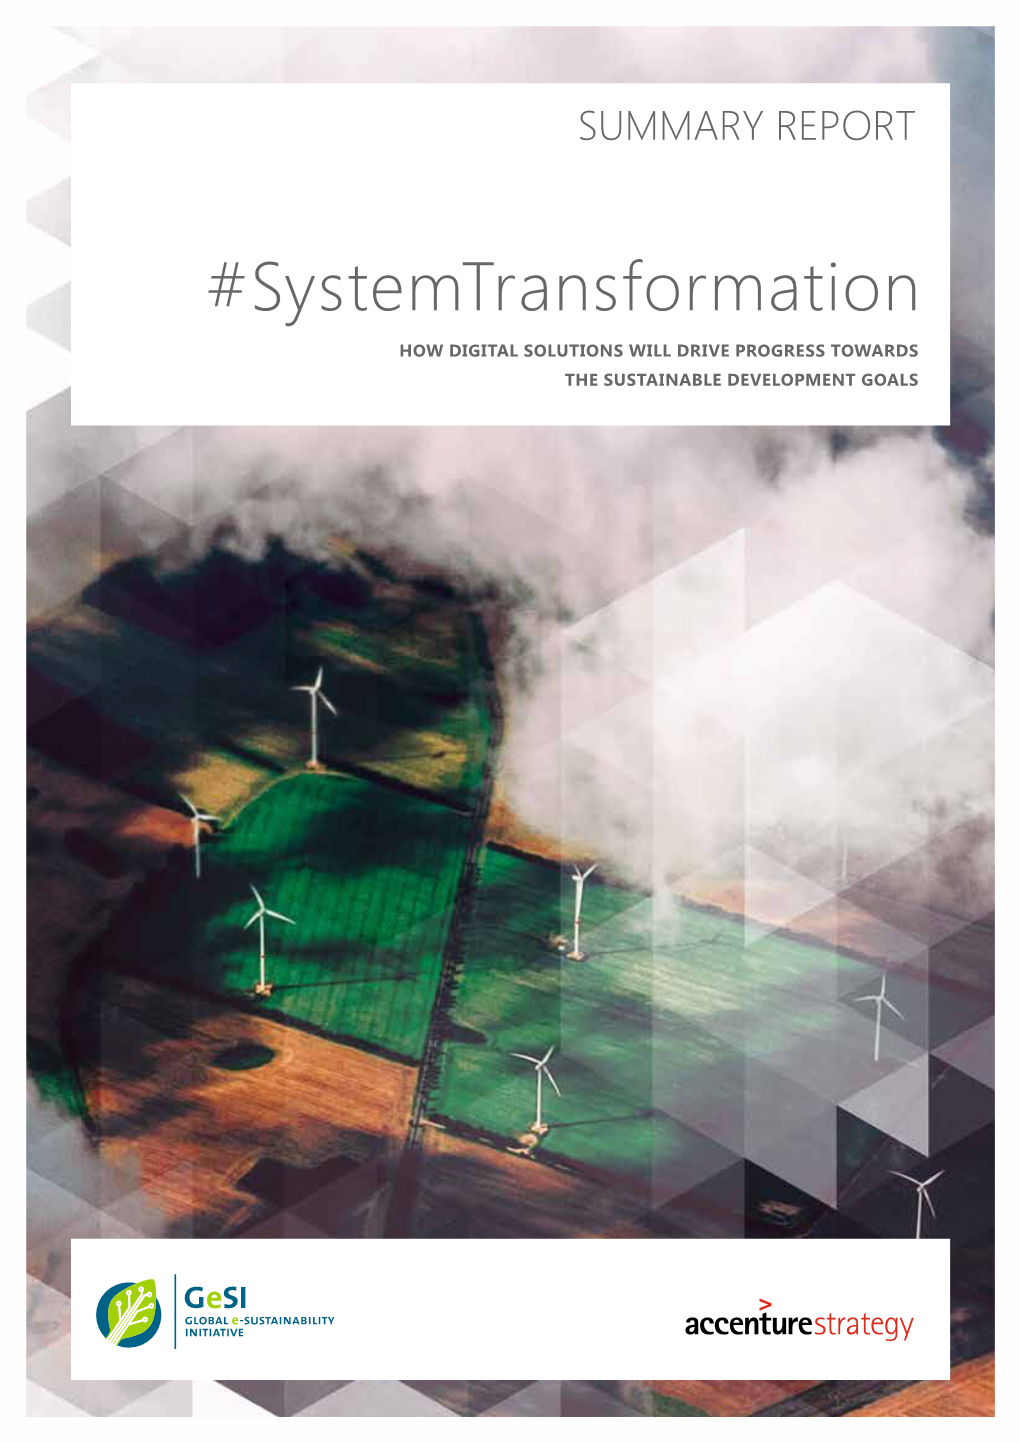 Systemtransformation HOW DIGITAL SOLUTIONS WILL DRIVE PROGRESS TOWARDS the SUSTAINABLE DEVELOPMENT GOALS Contents